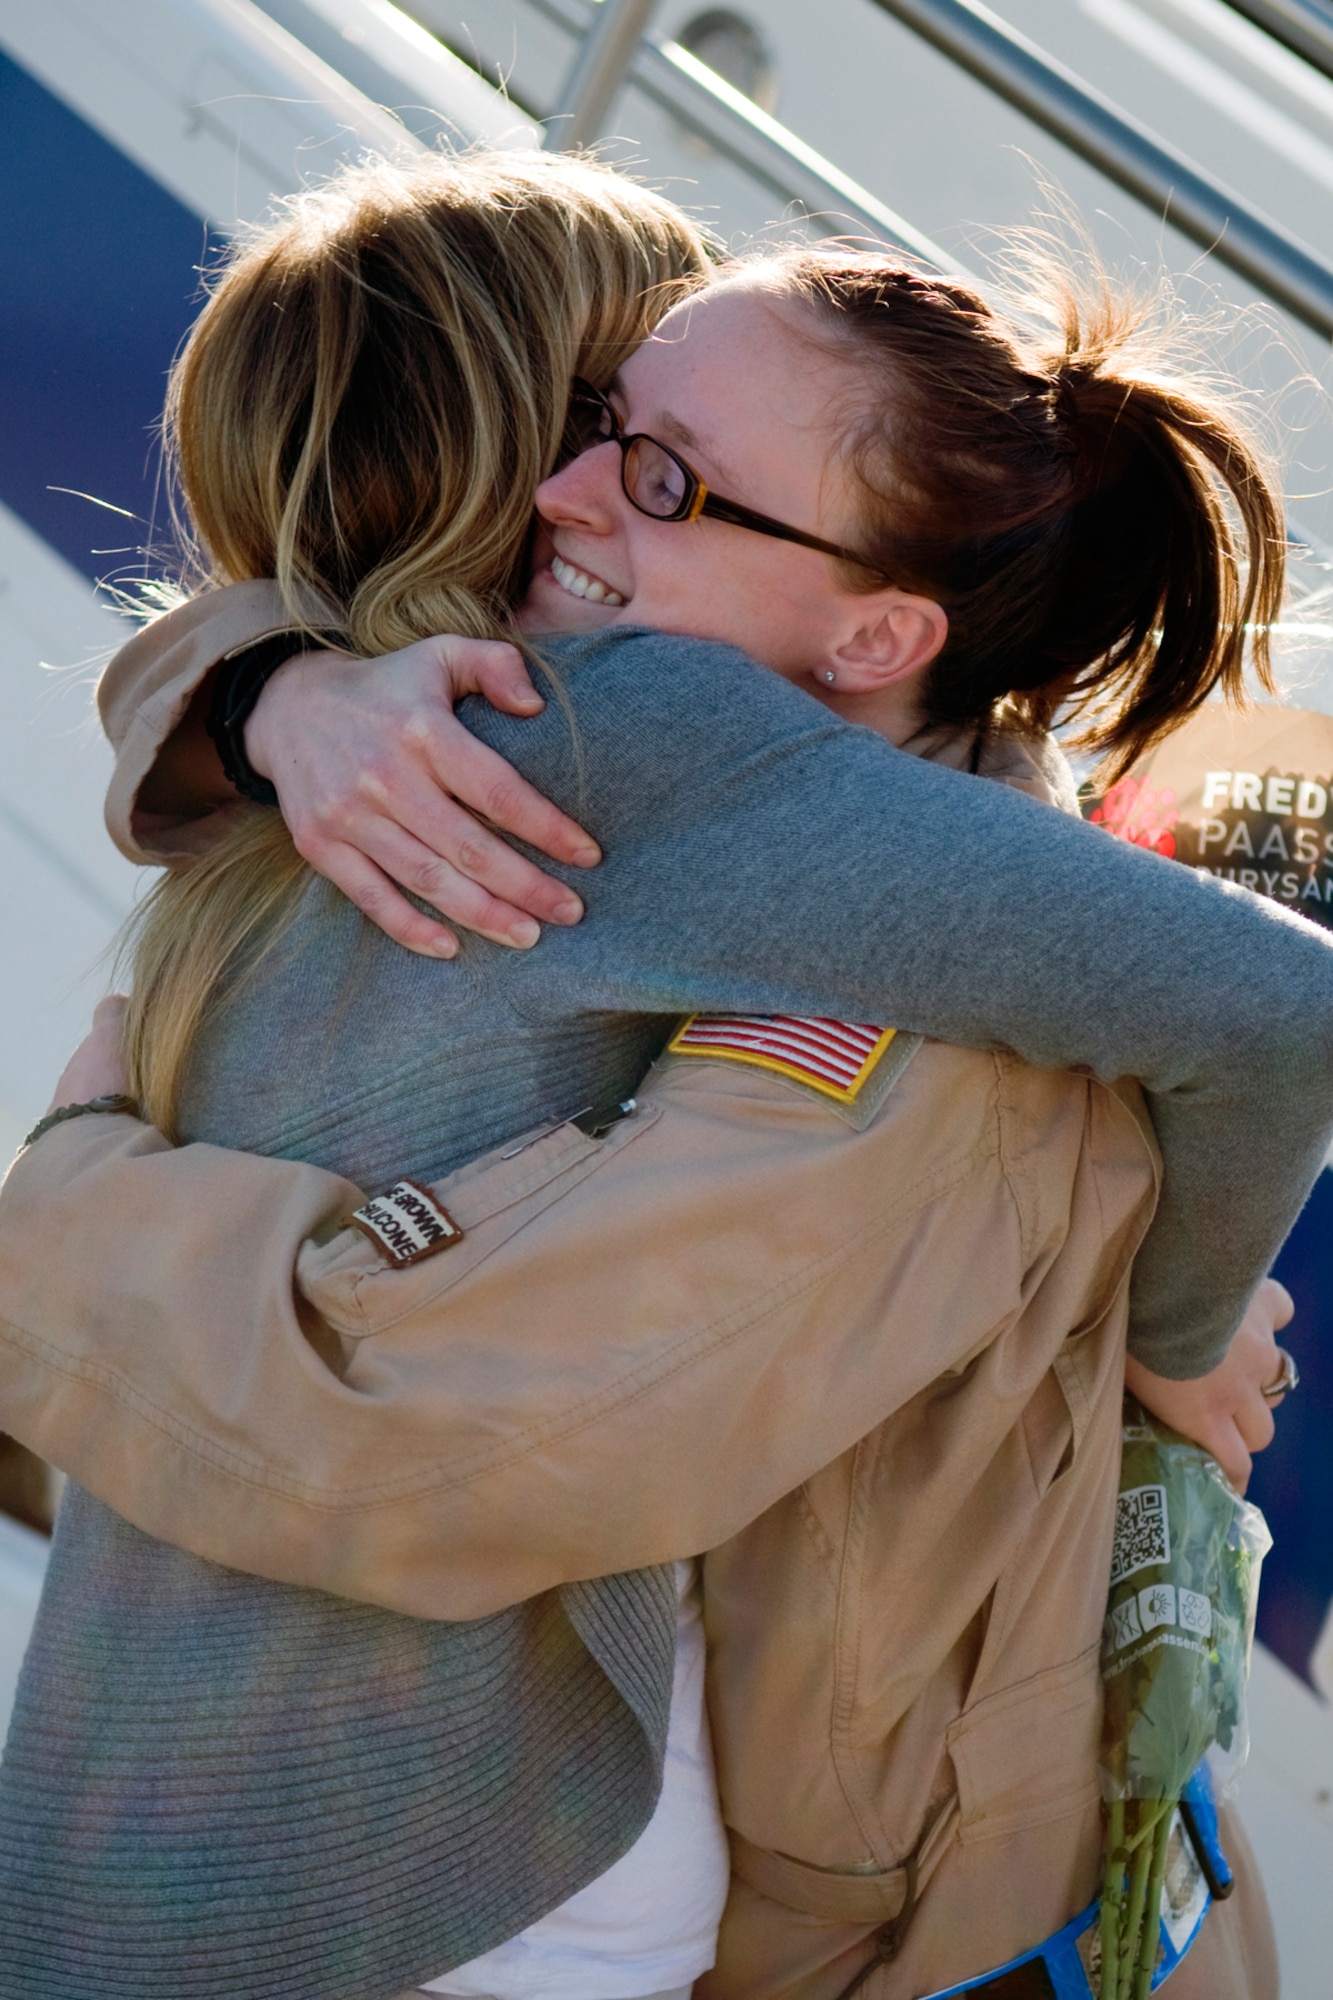 GRISSOM AIR RESERVE BASE, Ind. -- Staff Sgt. Crystal Nix, 72nd Air Refueling Squadron boom operator, gets a welcoming hug from Stephanie Creel after returning from a deployment to Southwest Asia Jan. 5. Nix deployed with several other 434th Air Refueling Wing Airmen for over two months in support of Operations Enduing Freedom and Odyssey Dawn. Creel is the wife of Capt. Jacob Creel, 72nd ARS pilot, who deployed with Nix. (U.S. Air Force photo/Tech. Sgt. Mark R. W. Orders-Woempner)
